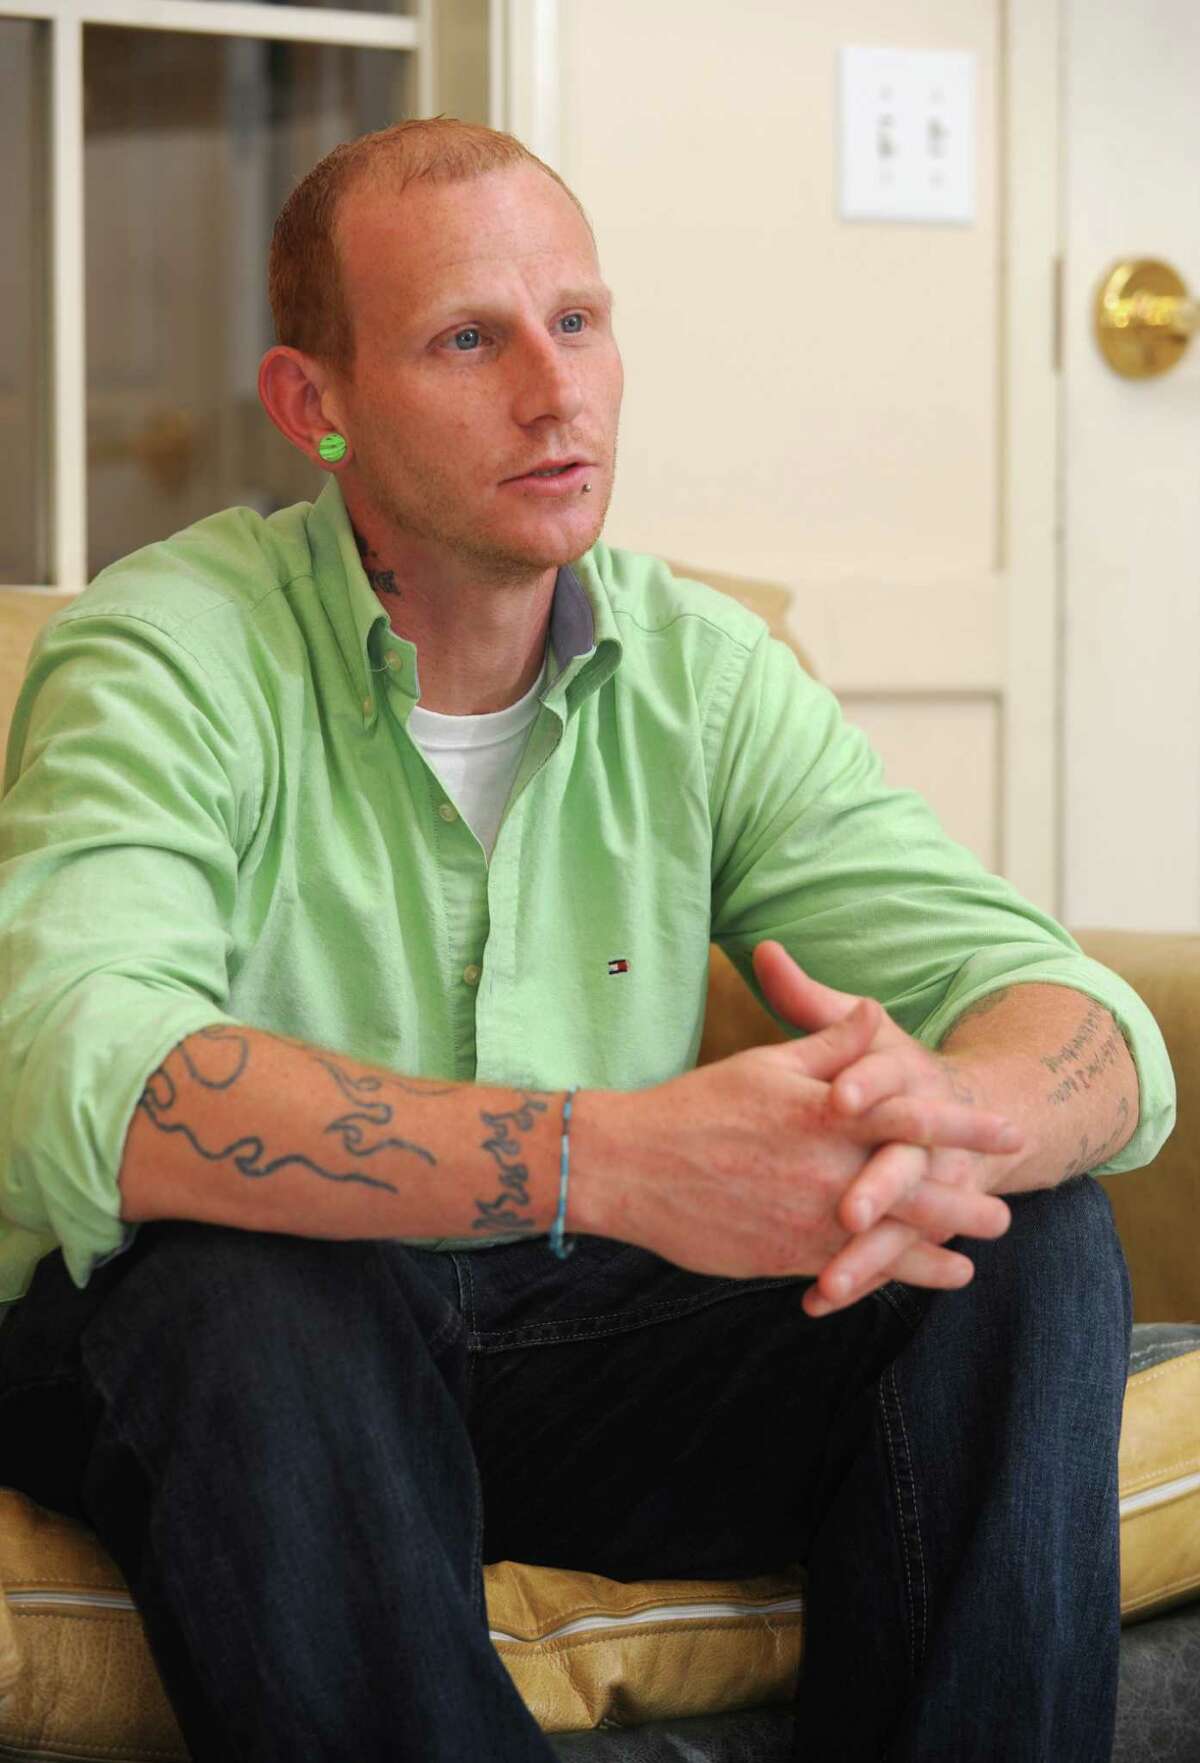 Steven Boles, a former addict who abused fentanyl, is interviewed at the Addictions Care Center of Albany on Wednesday, July 20, 2016 in Albany, N.Y. (Lori Van Buren / Times Union)